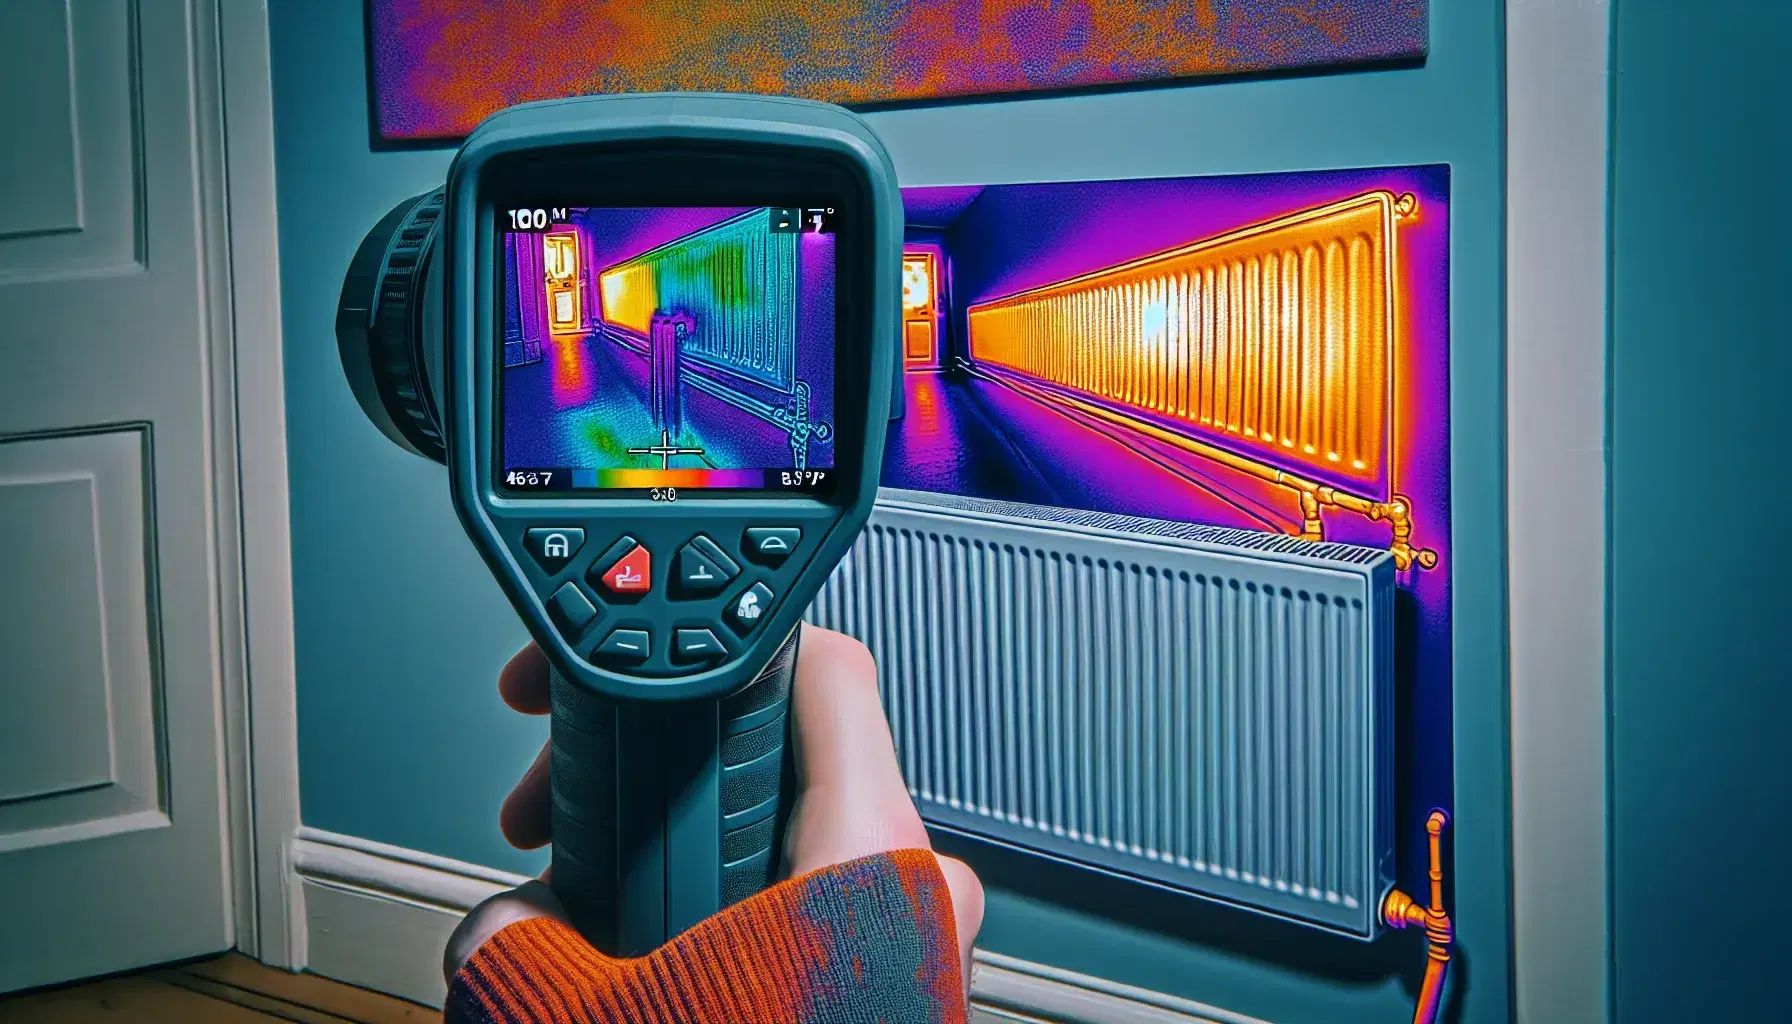 Person using a thermal infrared camera to detect heat emission from a household radiator, displaying a colorful temperature spectrum on the screen.